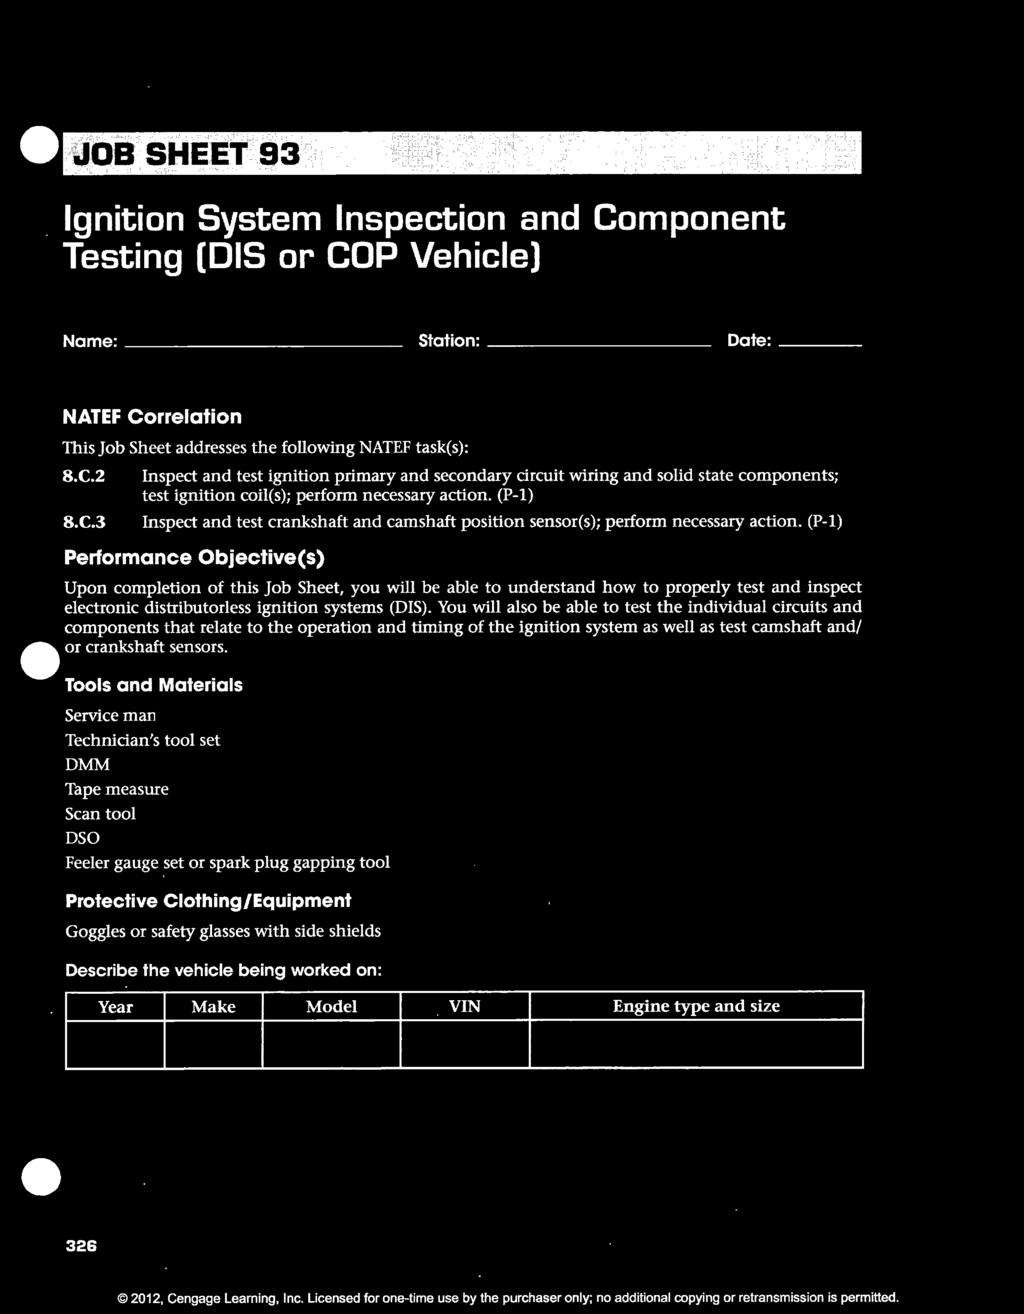 JOB SHEET 93 Ignition System Inspection and Component Testing (DIS or COP Vehicle) Name: --------------------------- Station:--------------------- Date: NATEF Correlation This Job Sheet addresses the